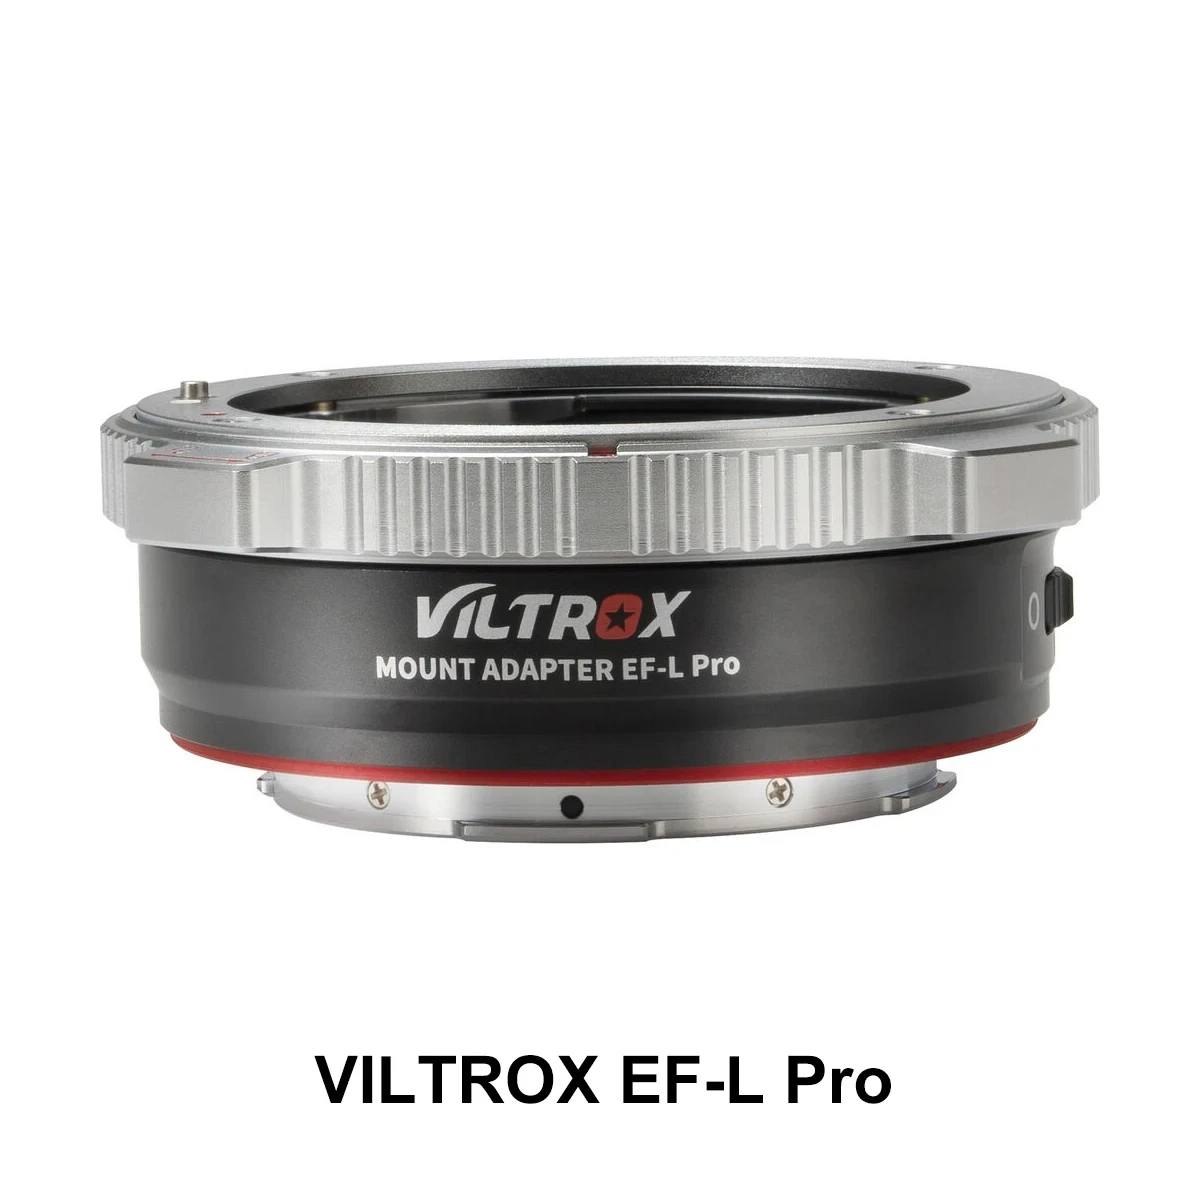 

VILTROX EF-L Pro Auto Focus Lens Adapter Ring for Canon EF/EF-S Lens to L Mount Leica Panasonic Sigma Camera S1R S1H